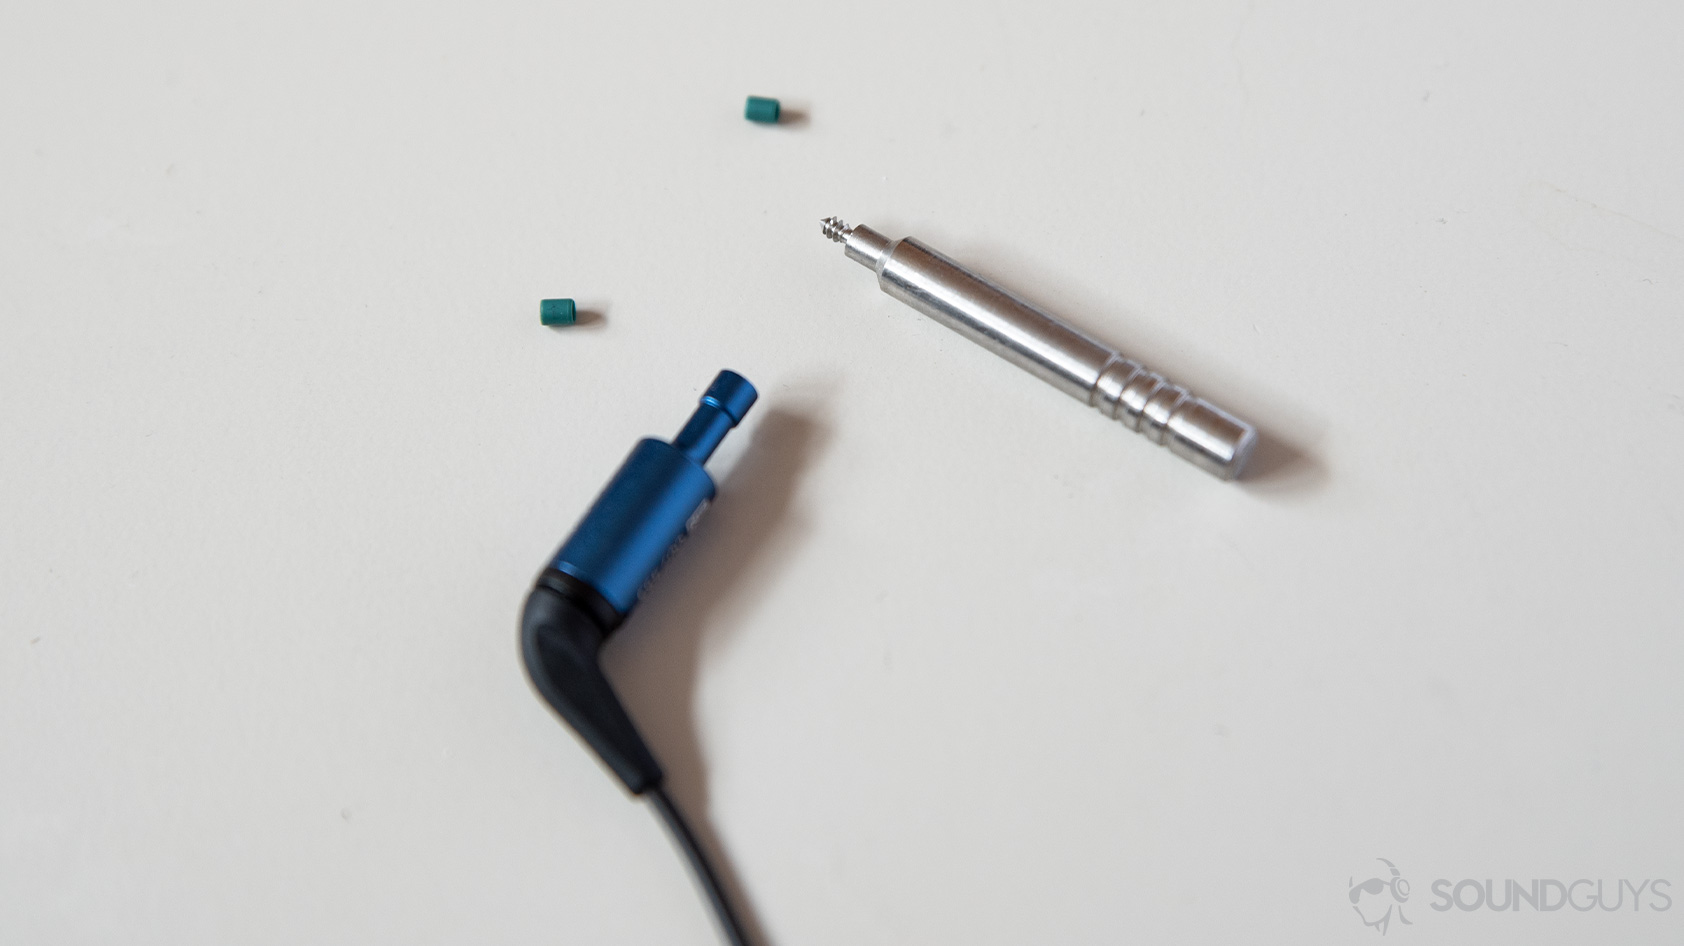 A picture of the Etymotic ER2SE wired earbuds and the filter removal tool.